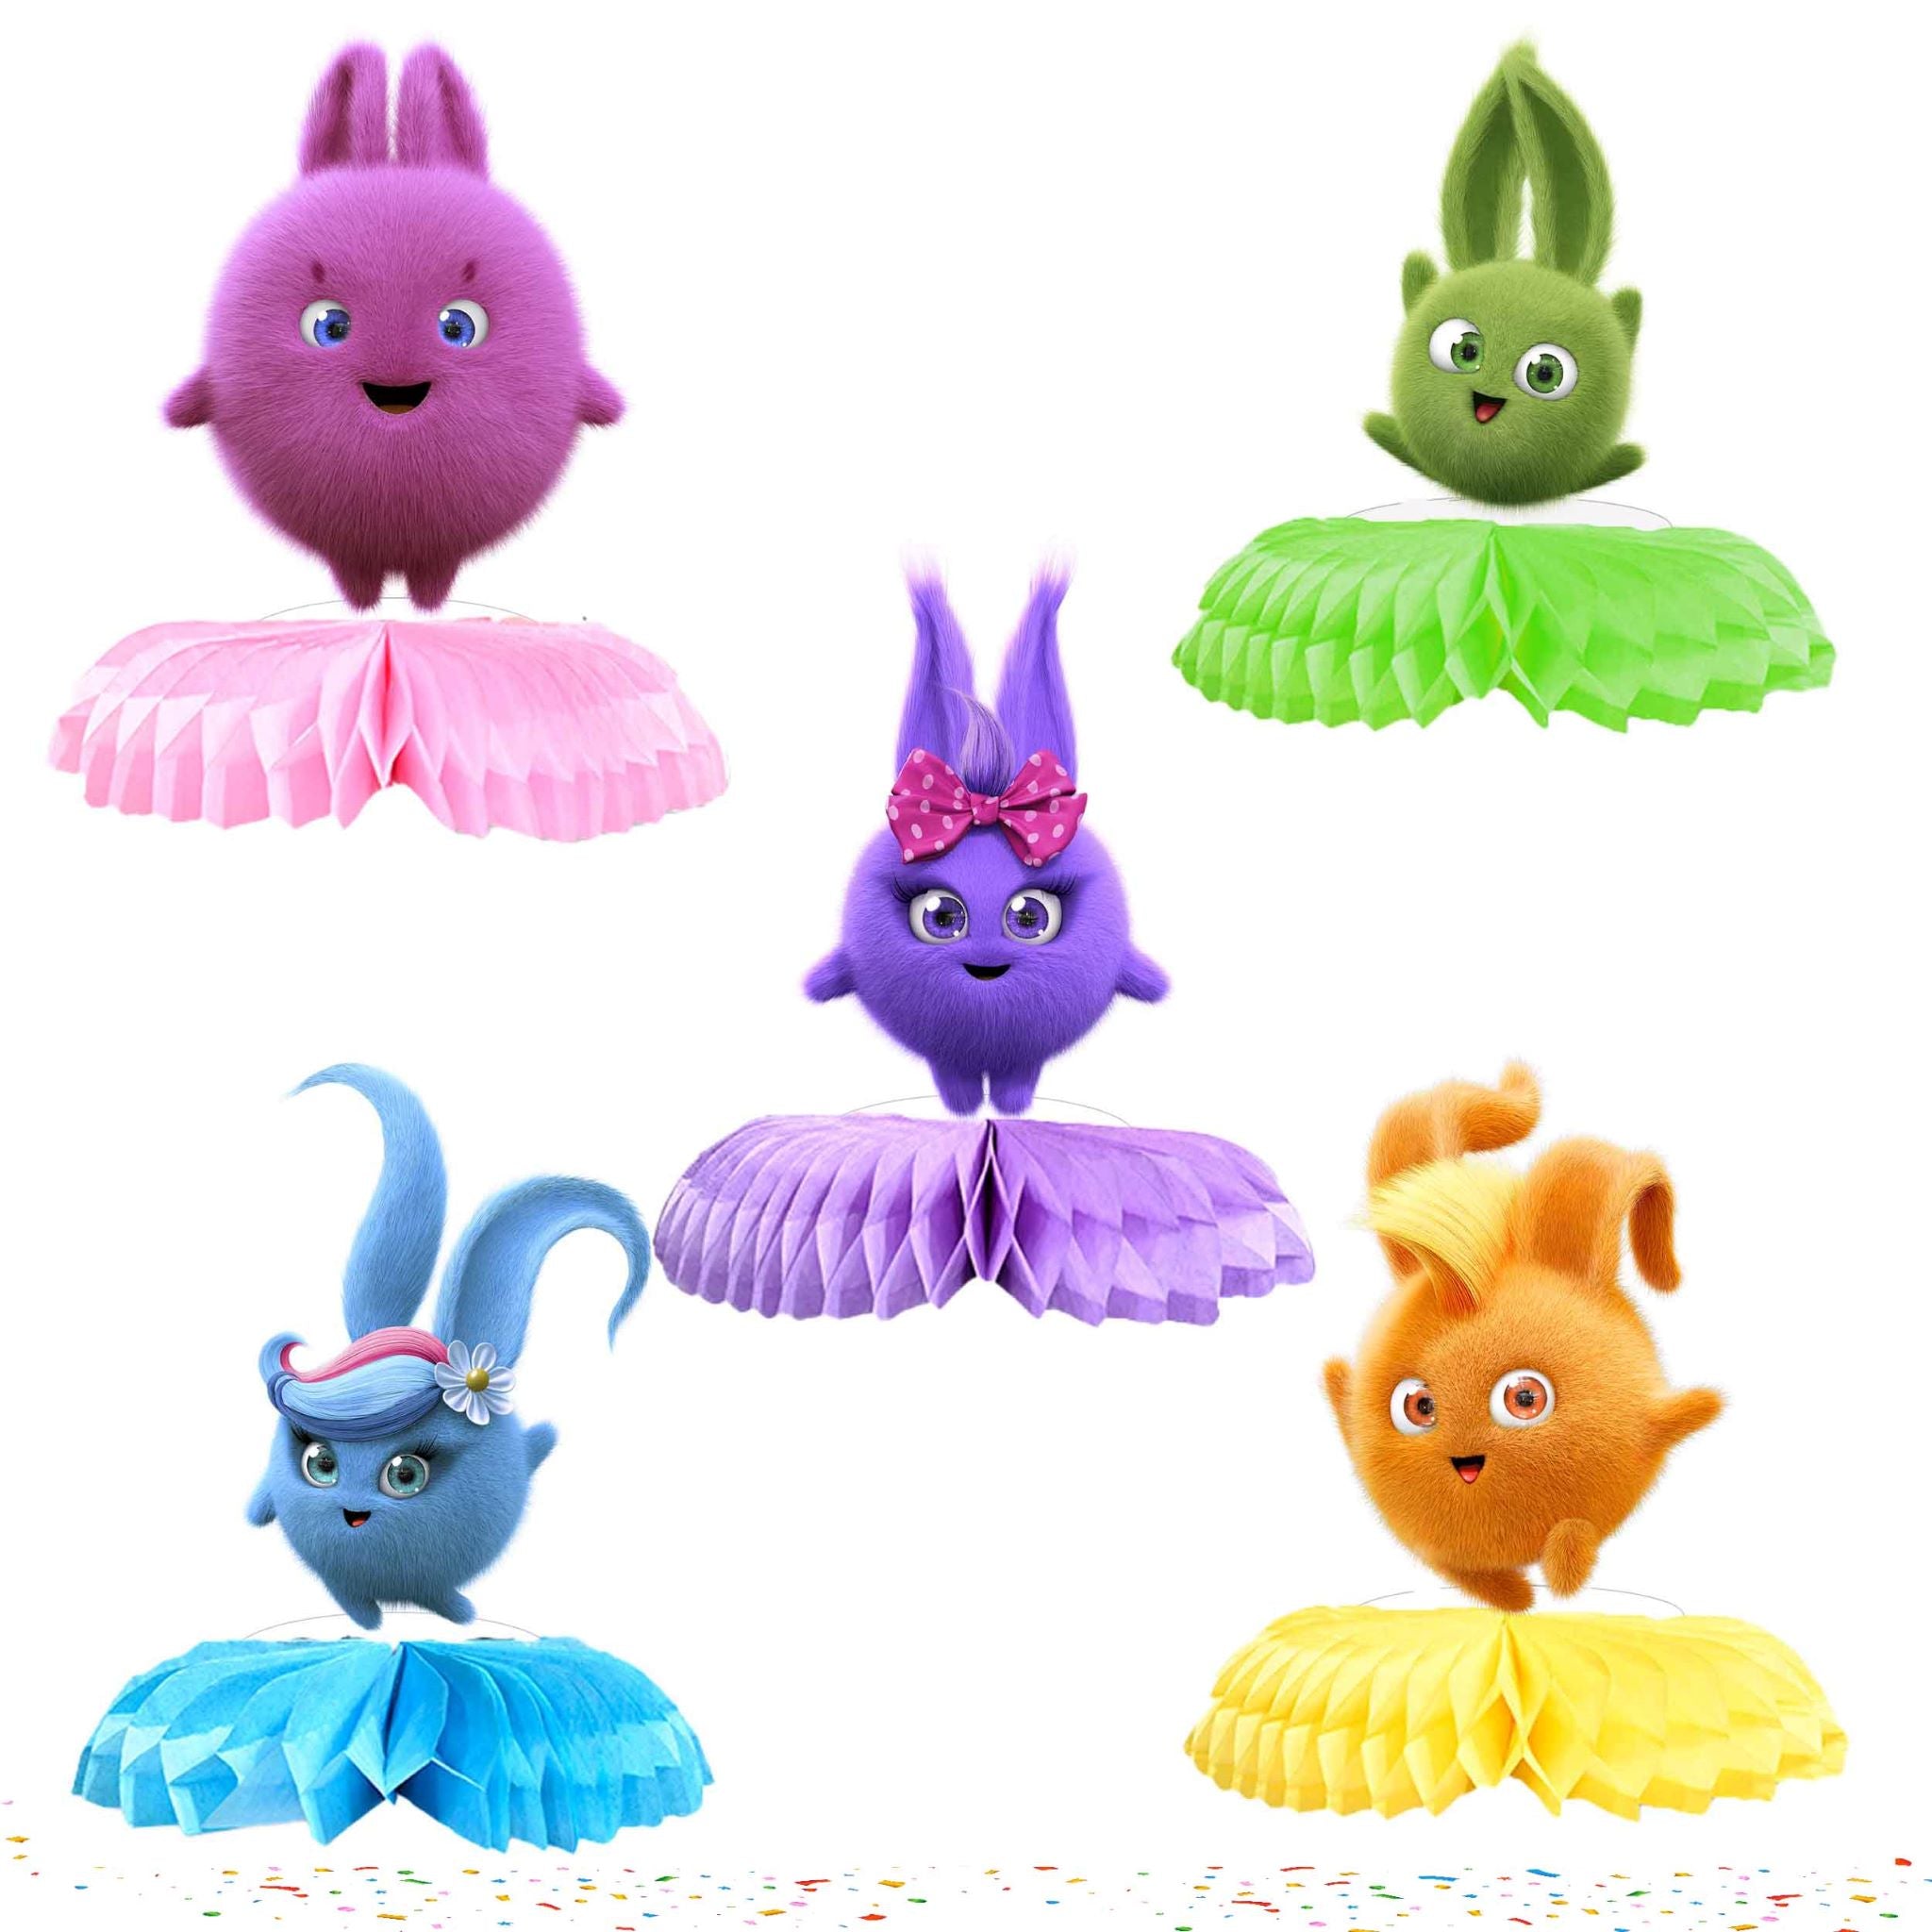 5 Pcs Sunny Bunnies Honeycomb Table Centerpieces - Add Playful Charm to Your Table Decor!